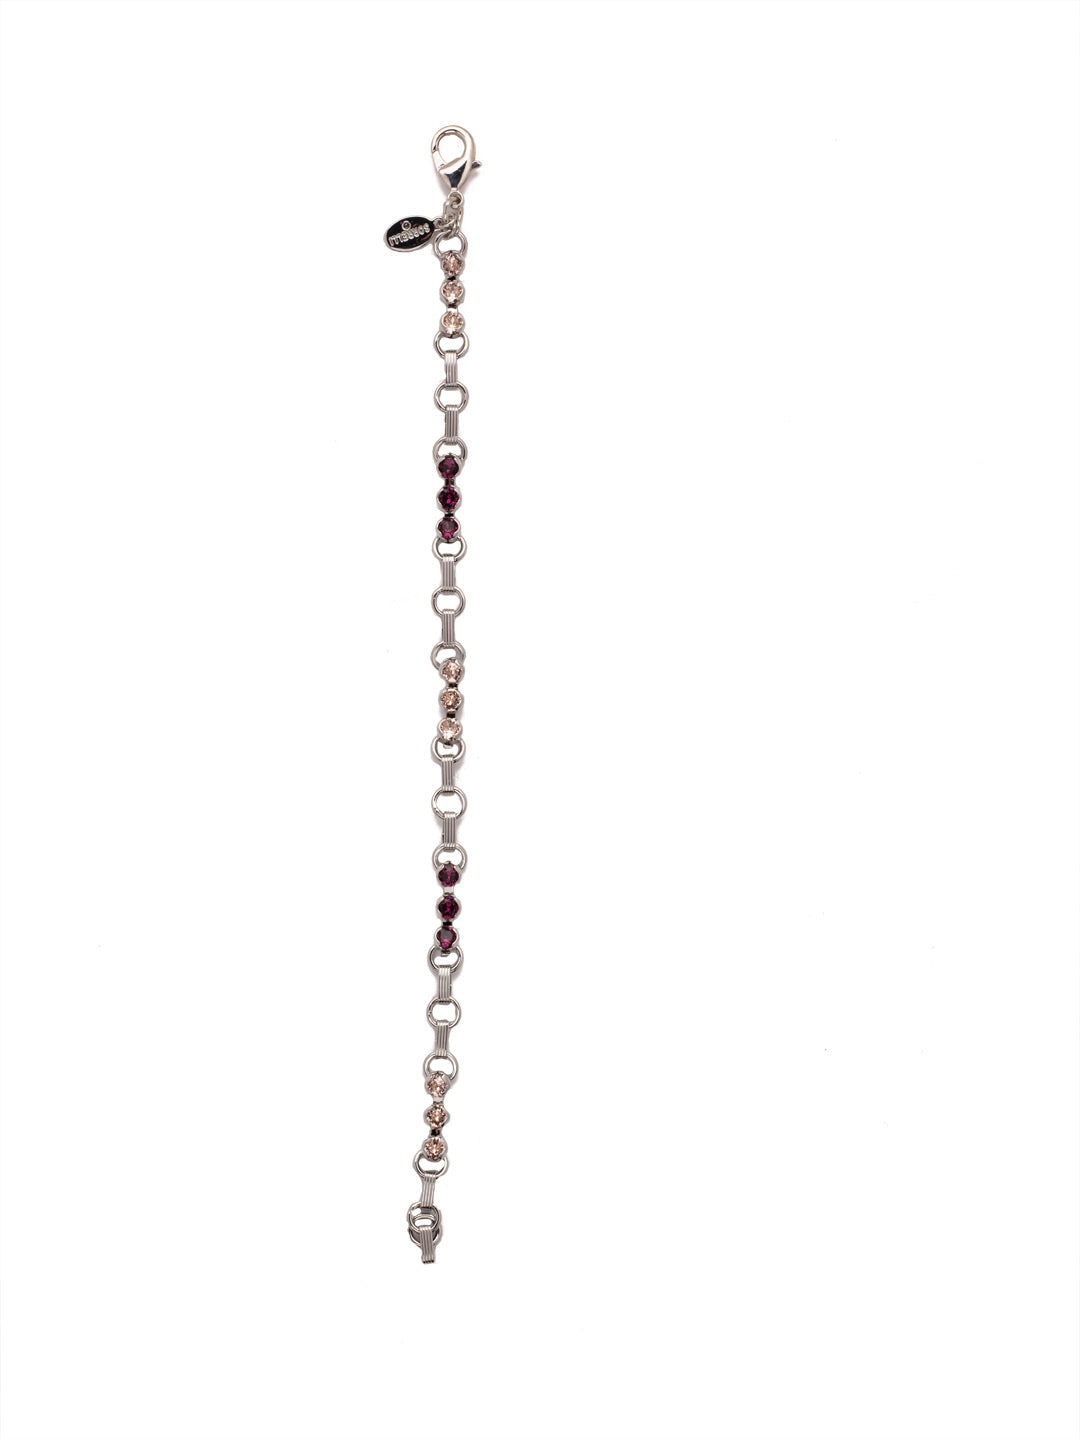 Patrice Tennis Bracelet - BEZ2PDSIP - The prongless style of the Patrice Tennis Bracelet is the hottest new Sorrelli staple. Alternating stud crystals and chain links are secured with a lobster clasp. From Sorrelli's Sienna Plum collection in our Palladium finish.